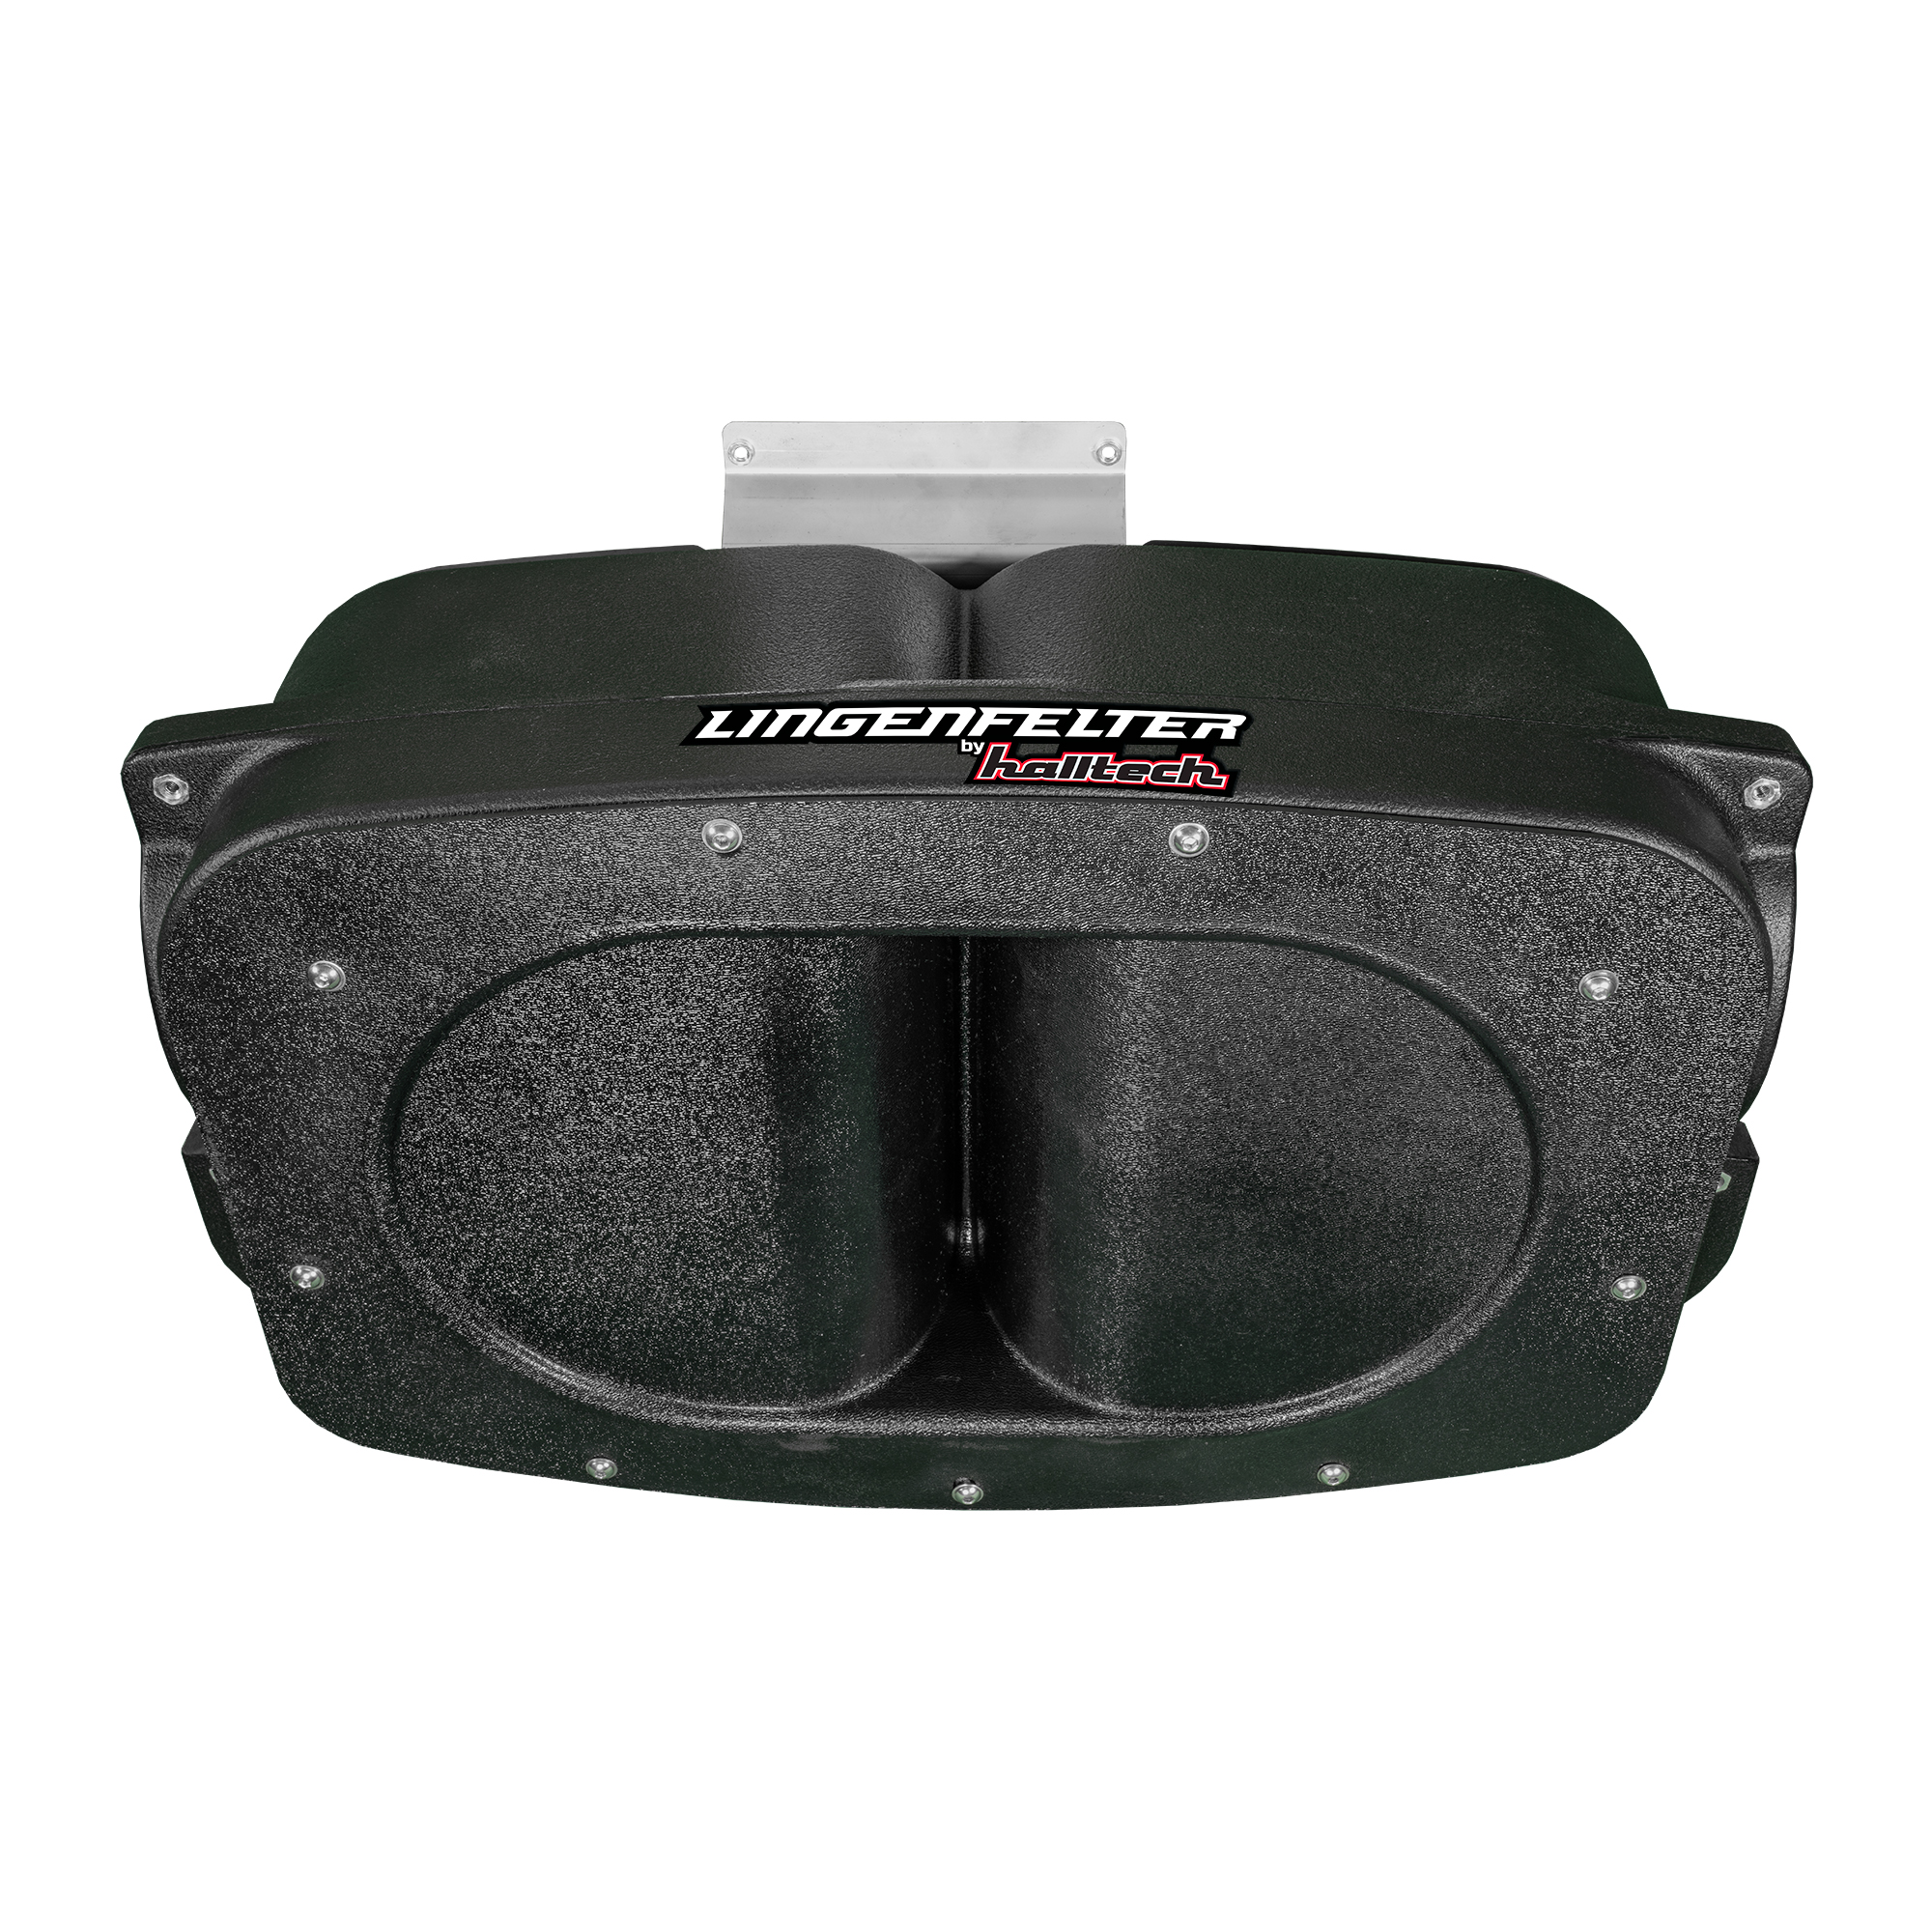 Lingenfelter C8 Corvette High-Performance Hornet Cold Air Intake Airbox by Halltech